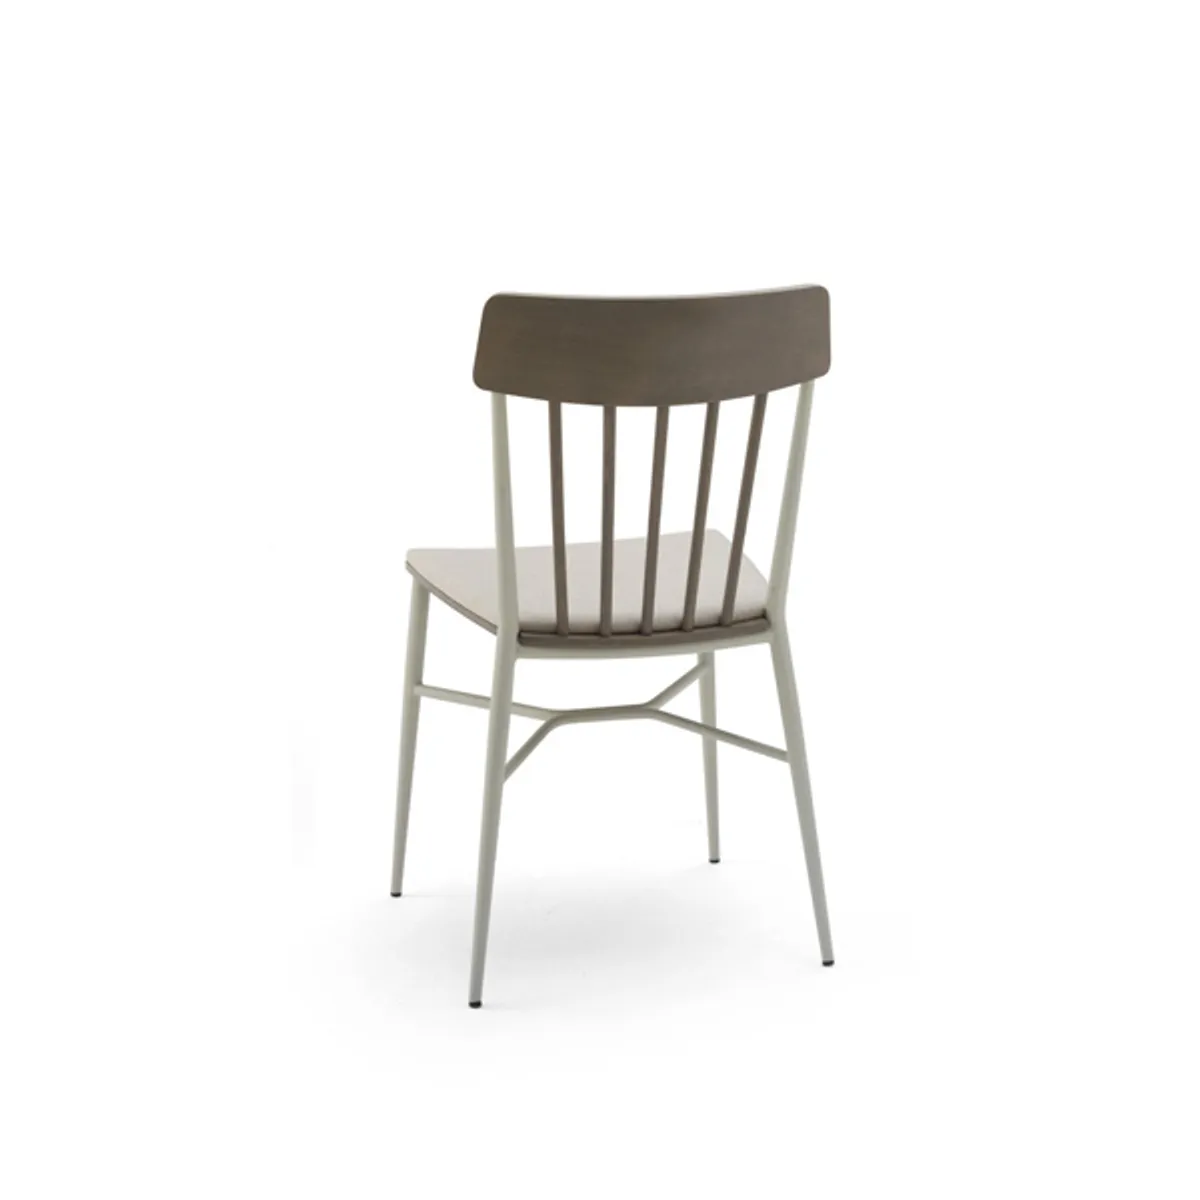 Agatha Side Chair White Frame Inside Out Contracts